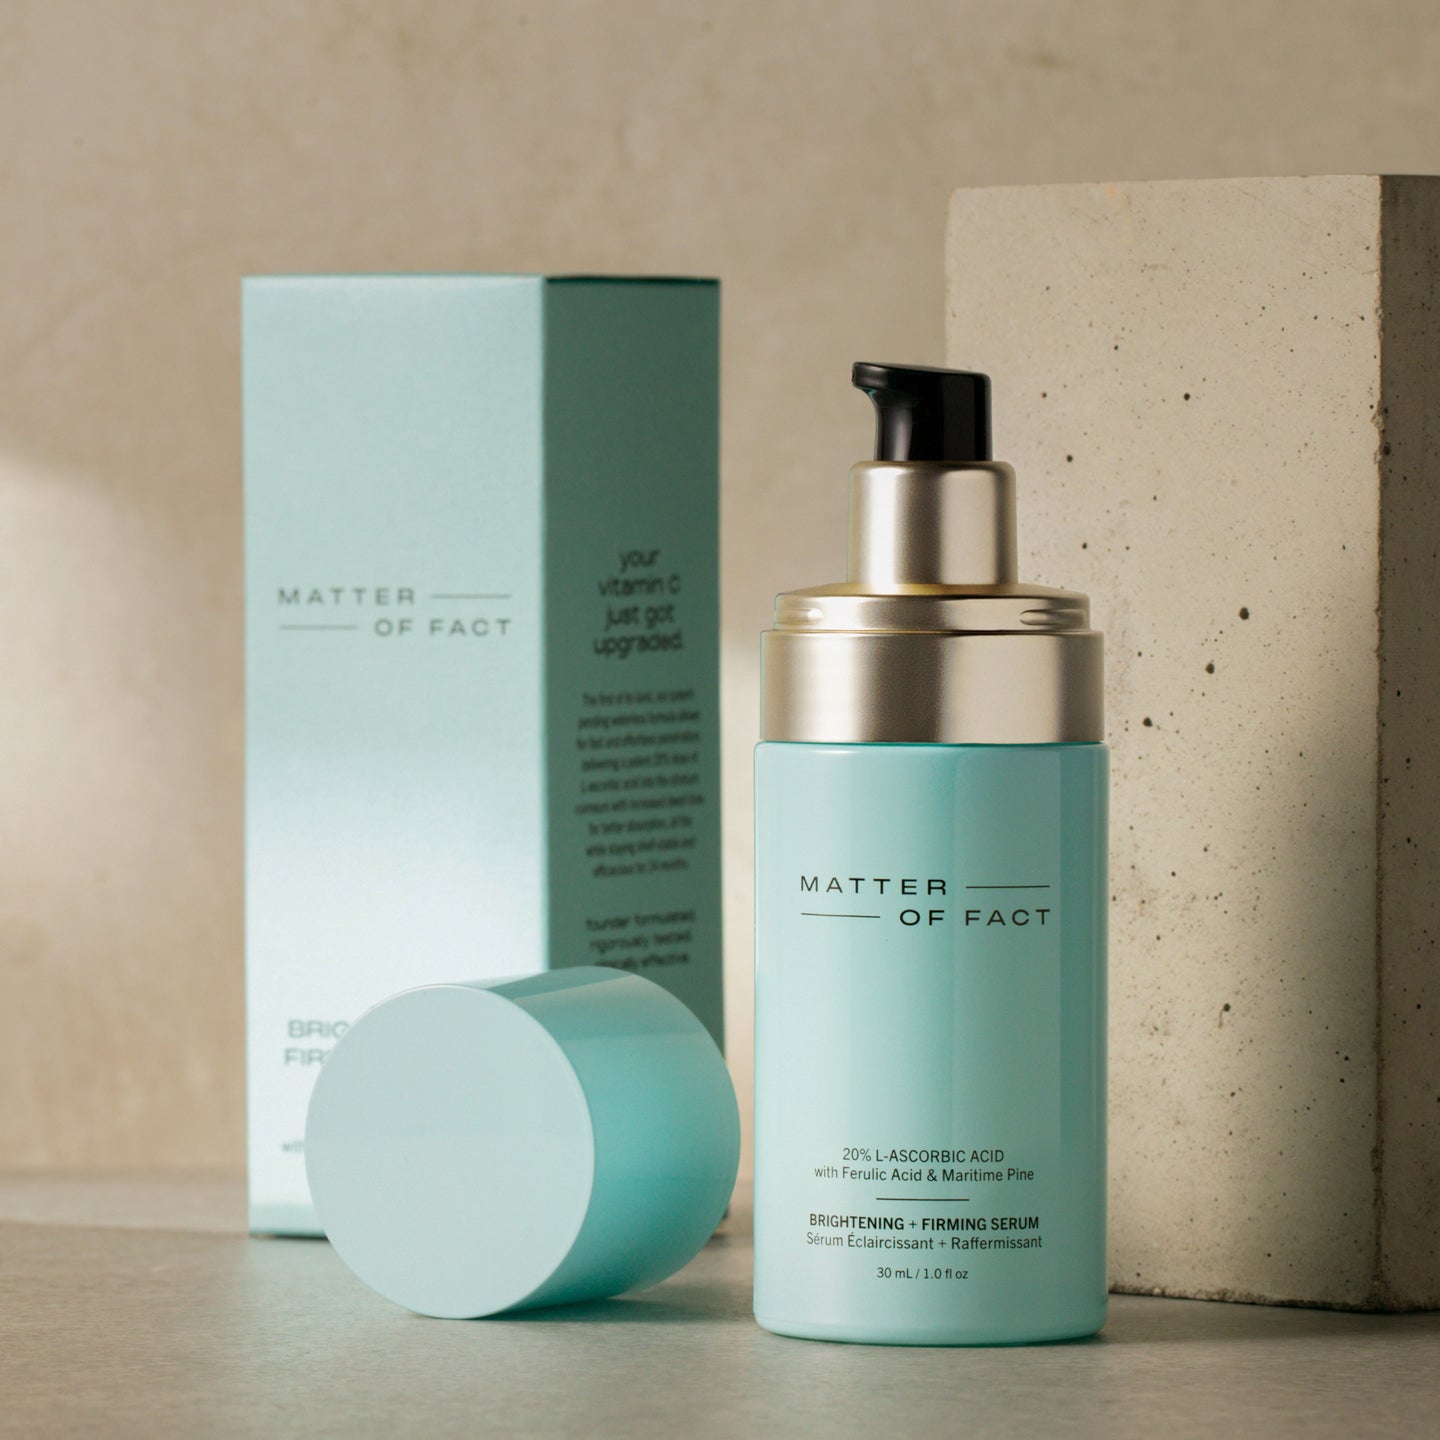 MATTER OF FACT SKINCARE BRIGHTENING AND FIRMING SERUM product vessel on a beige background with the product packaging and applicator visible